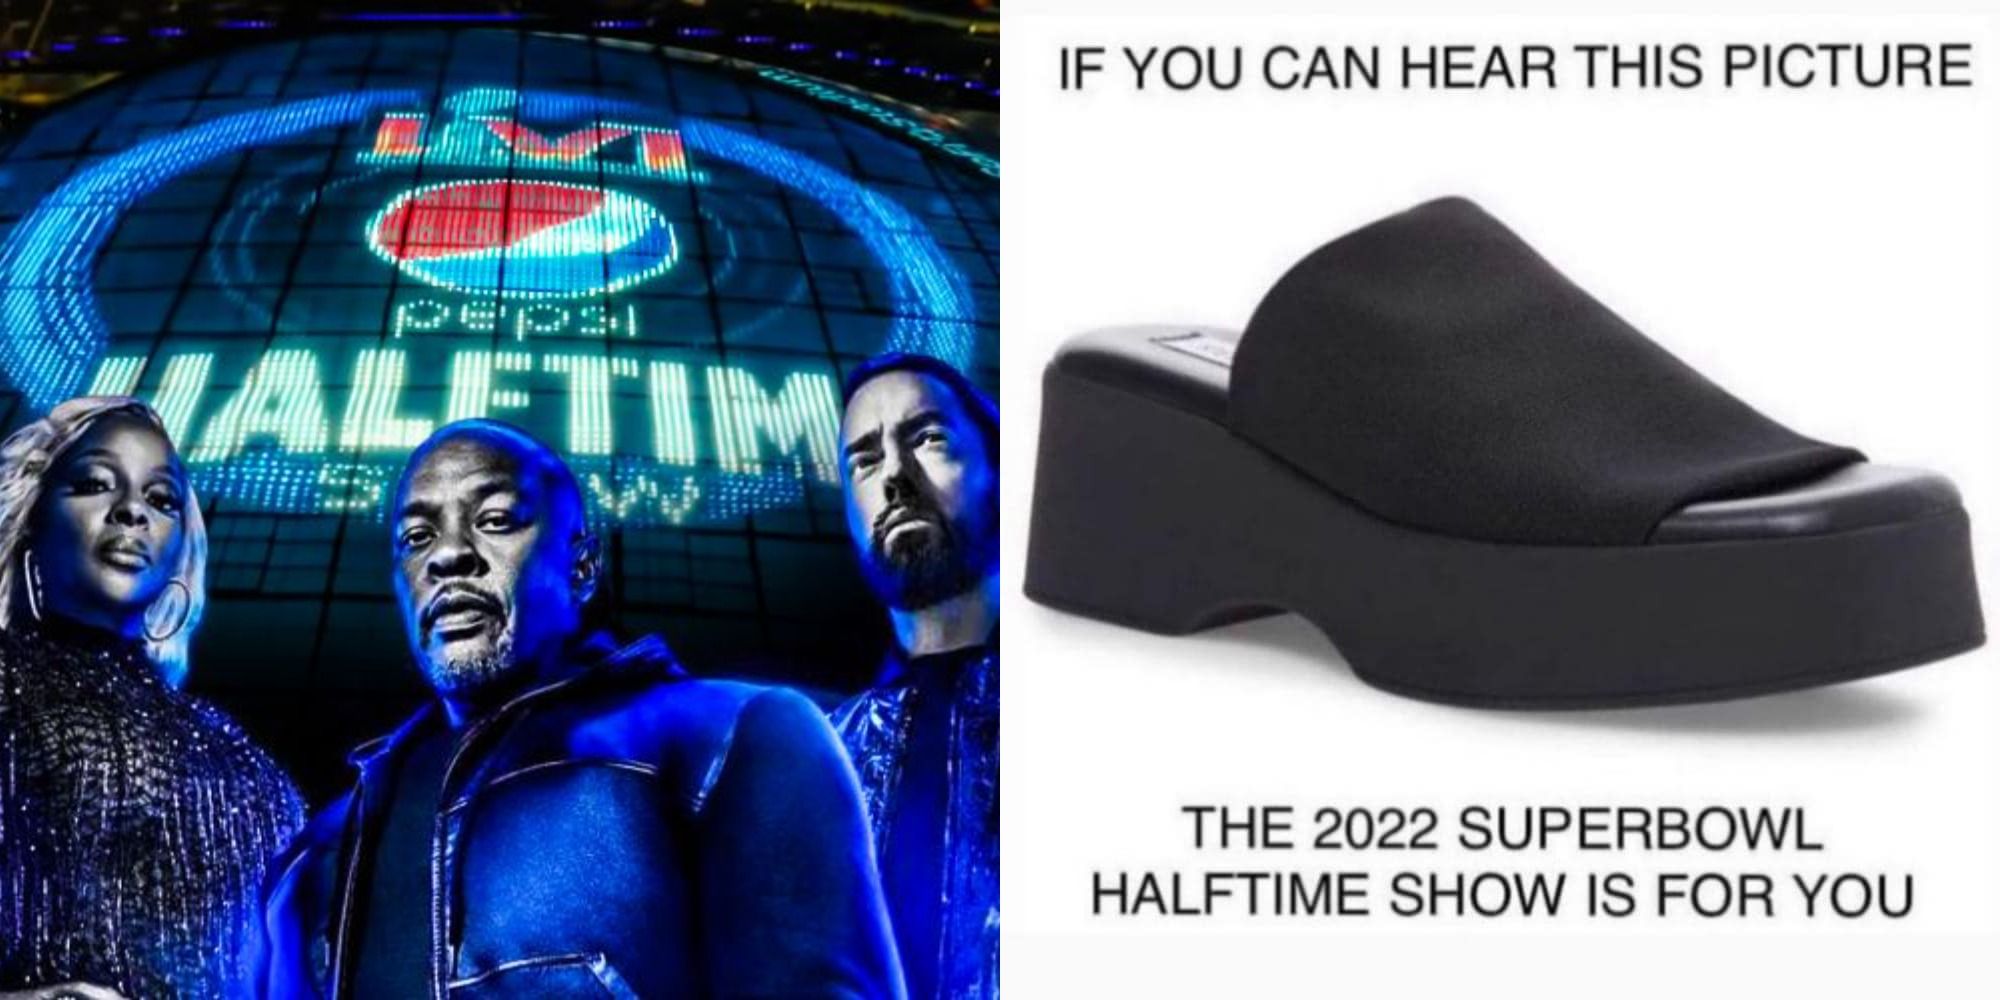 Split image showing the poster for the 2022 Super Bowl halftime show and a meme about it